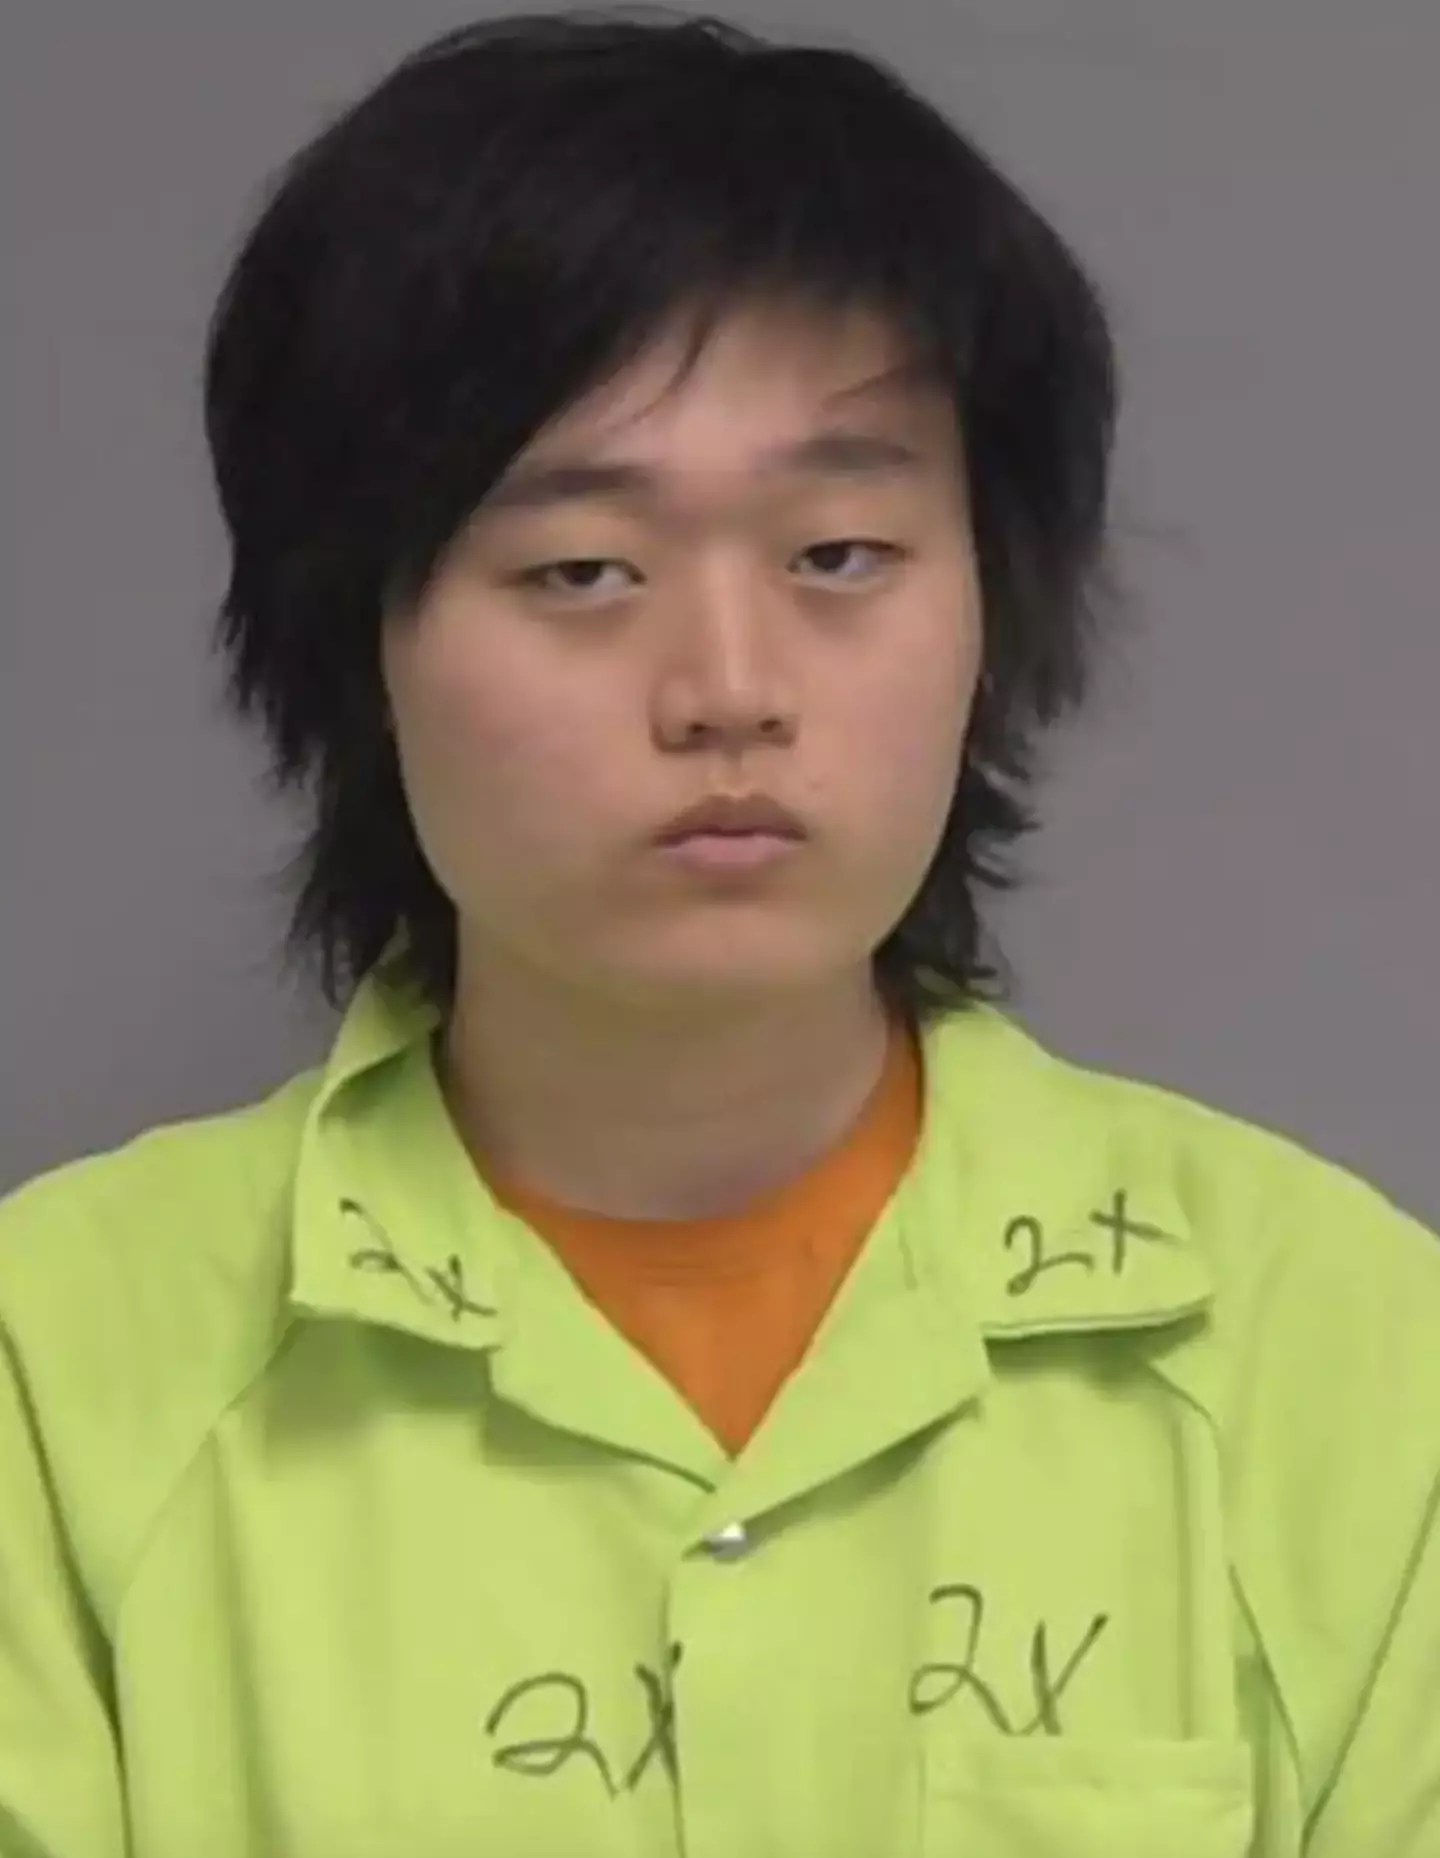 Edward Kang flew to Florida to attack an online rival (Nassau County Sheriff's Office)